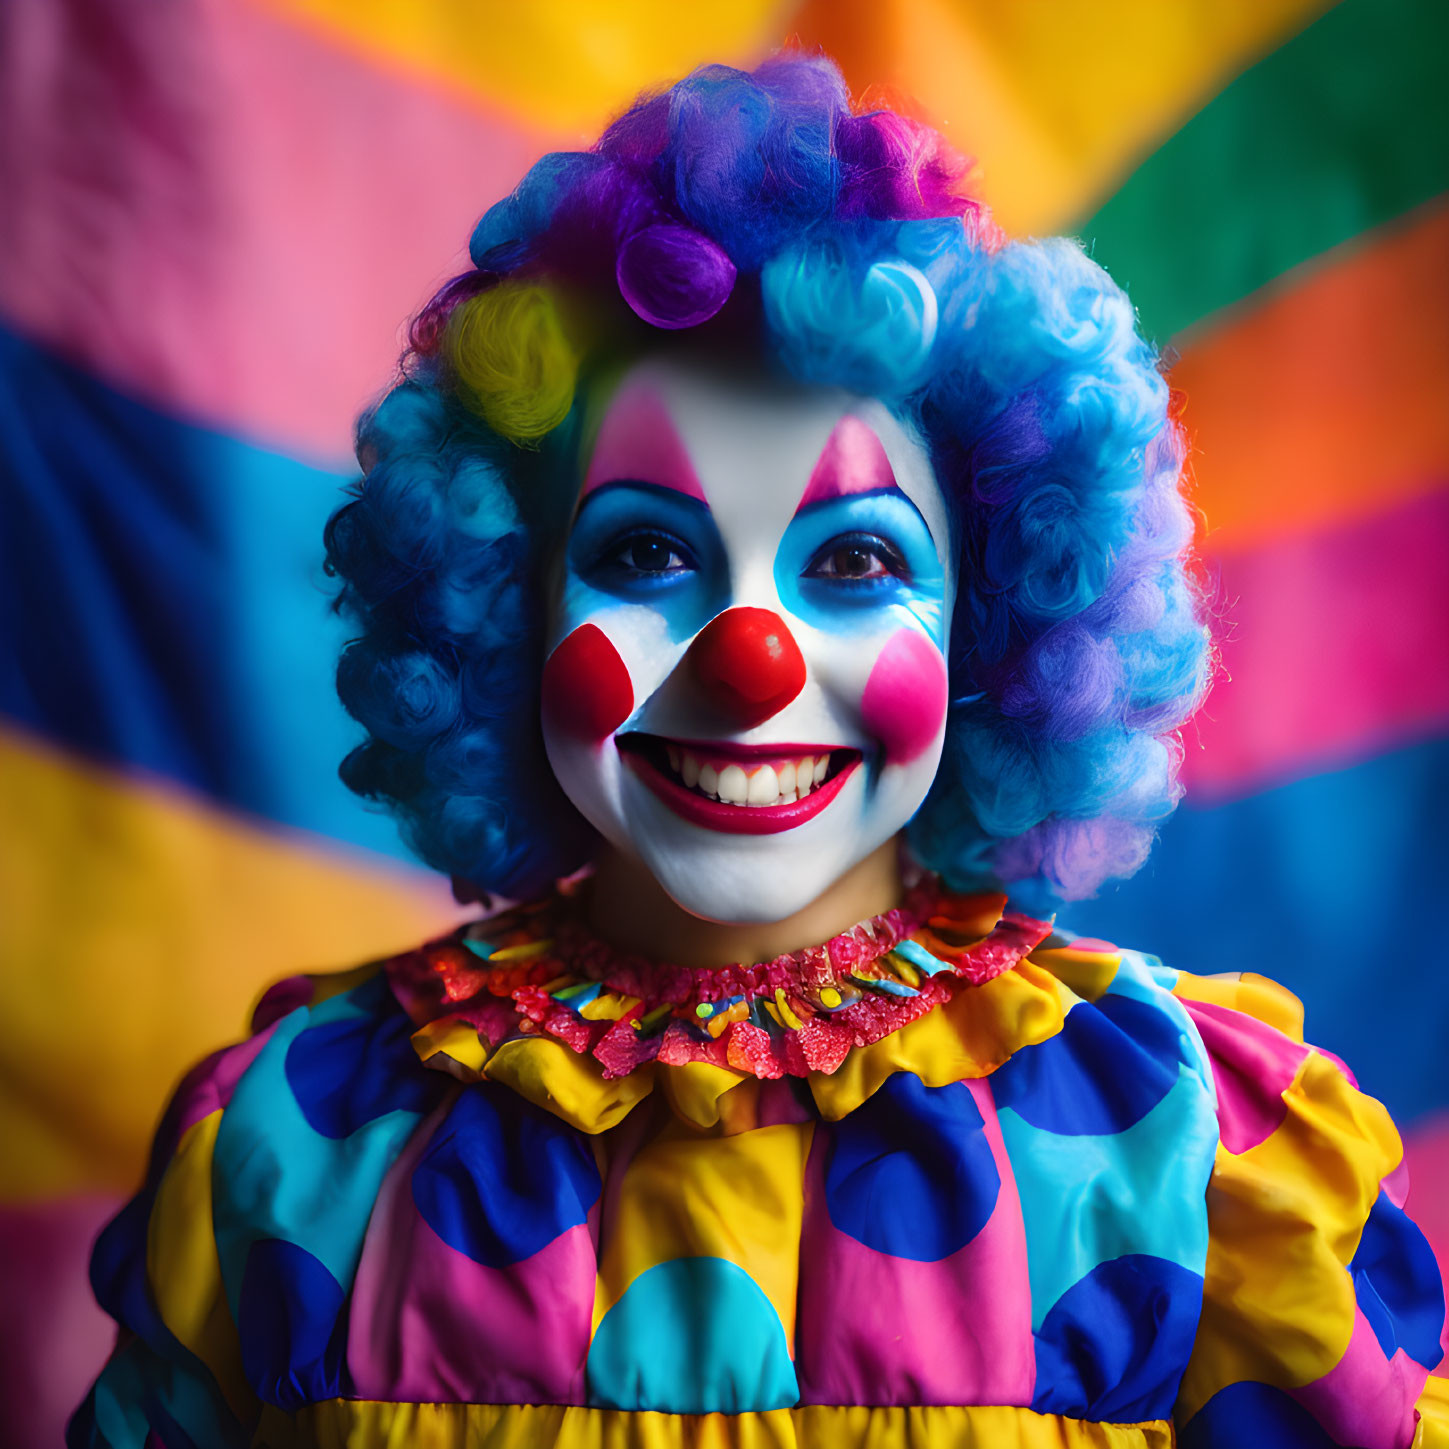 Colorful Clown in Vibrant Background: A person in clown makeup and costume against a multicolored